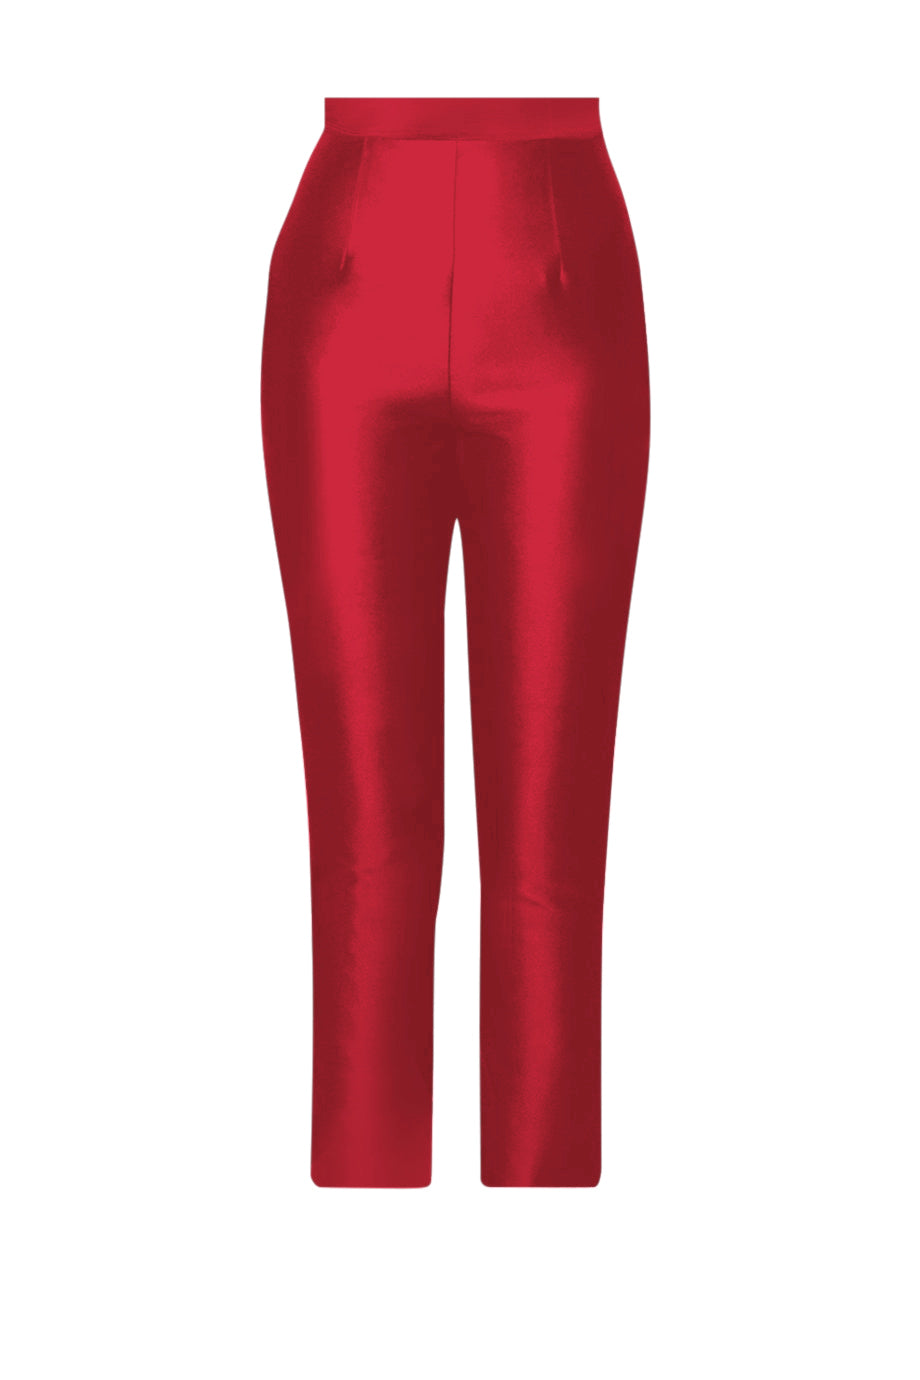 Buy Red Trousers & Pants for Women by Wknd Online | Ajio.com